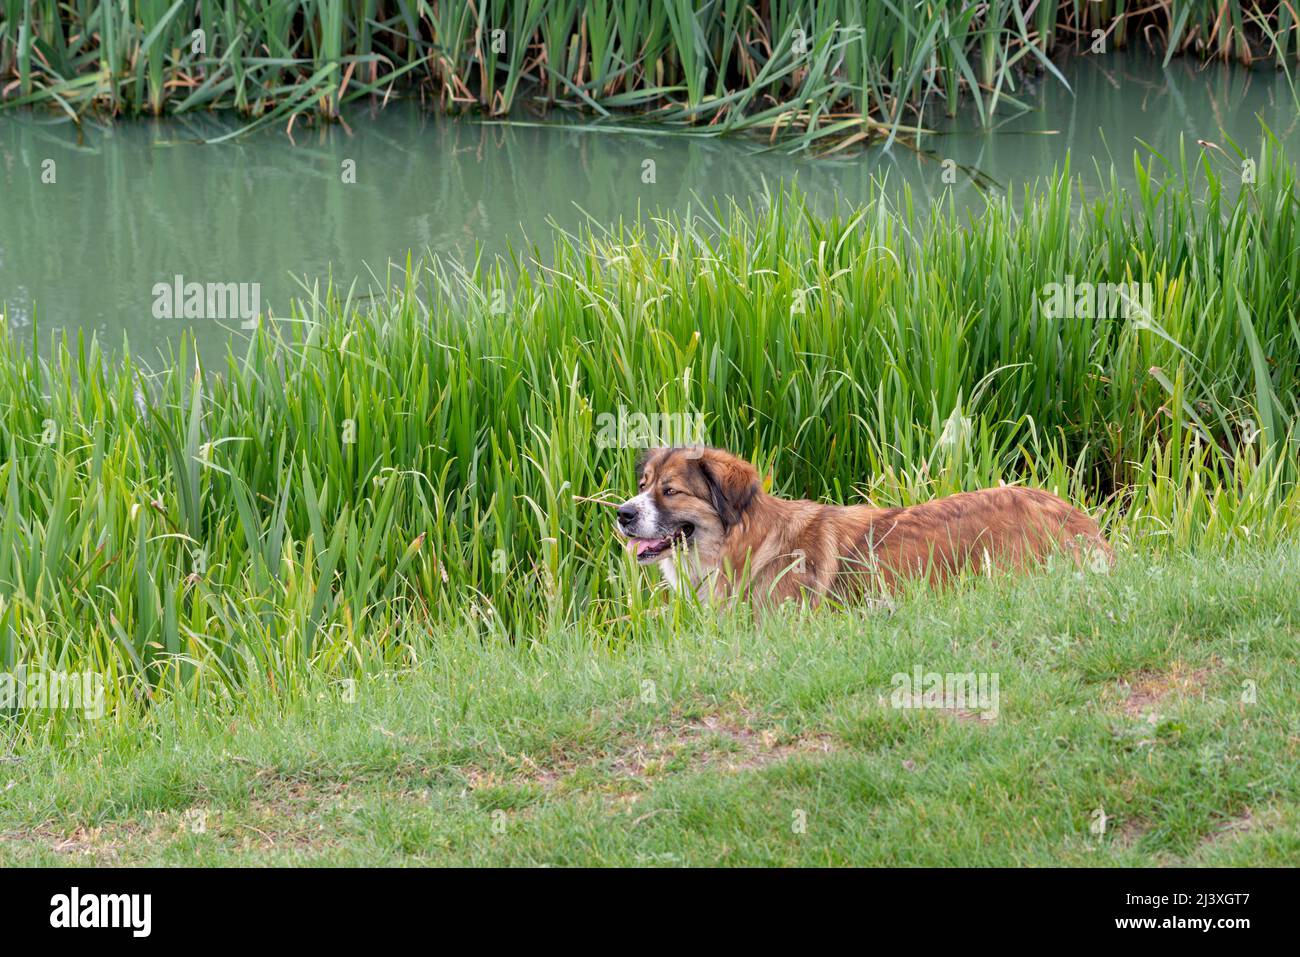 Large dog standing in the grass by the lake looking expectantly. Stock Photo